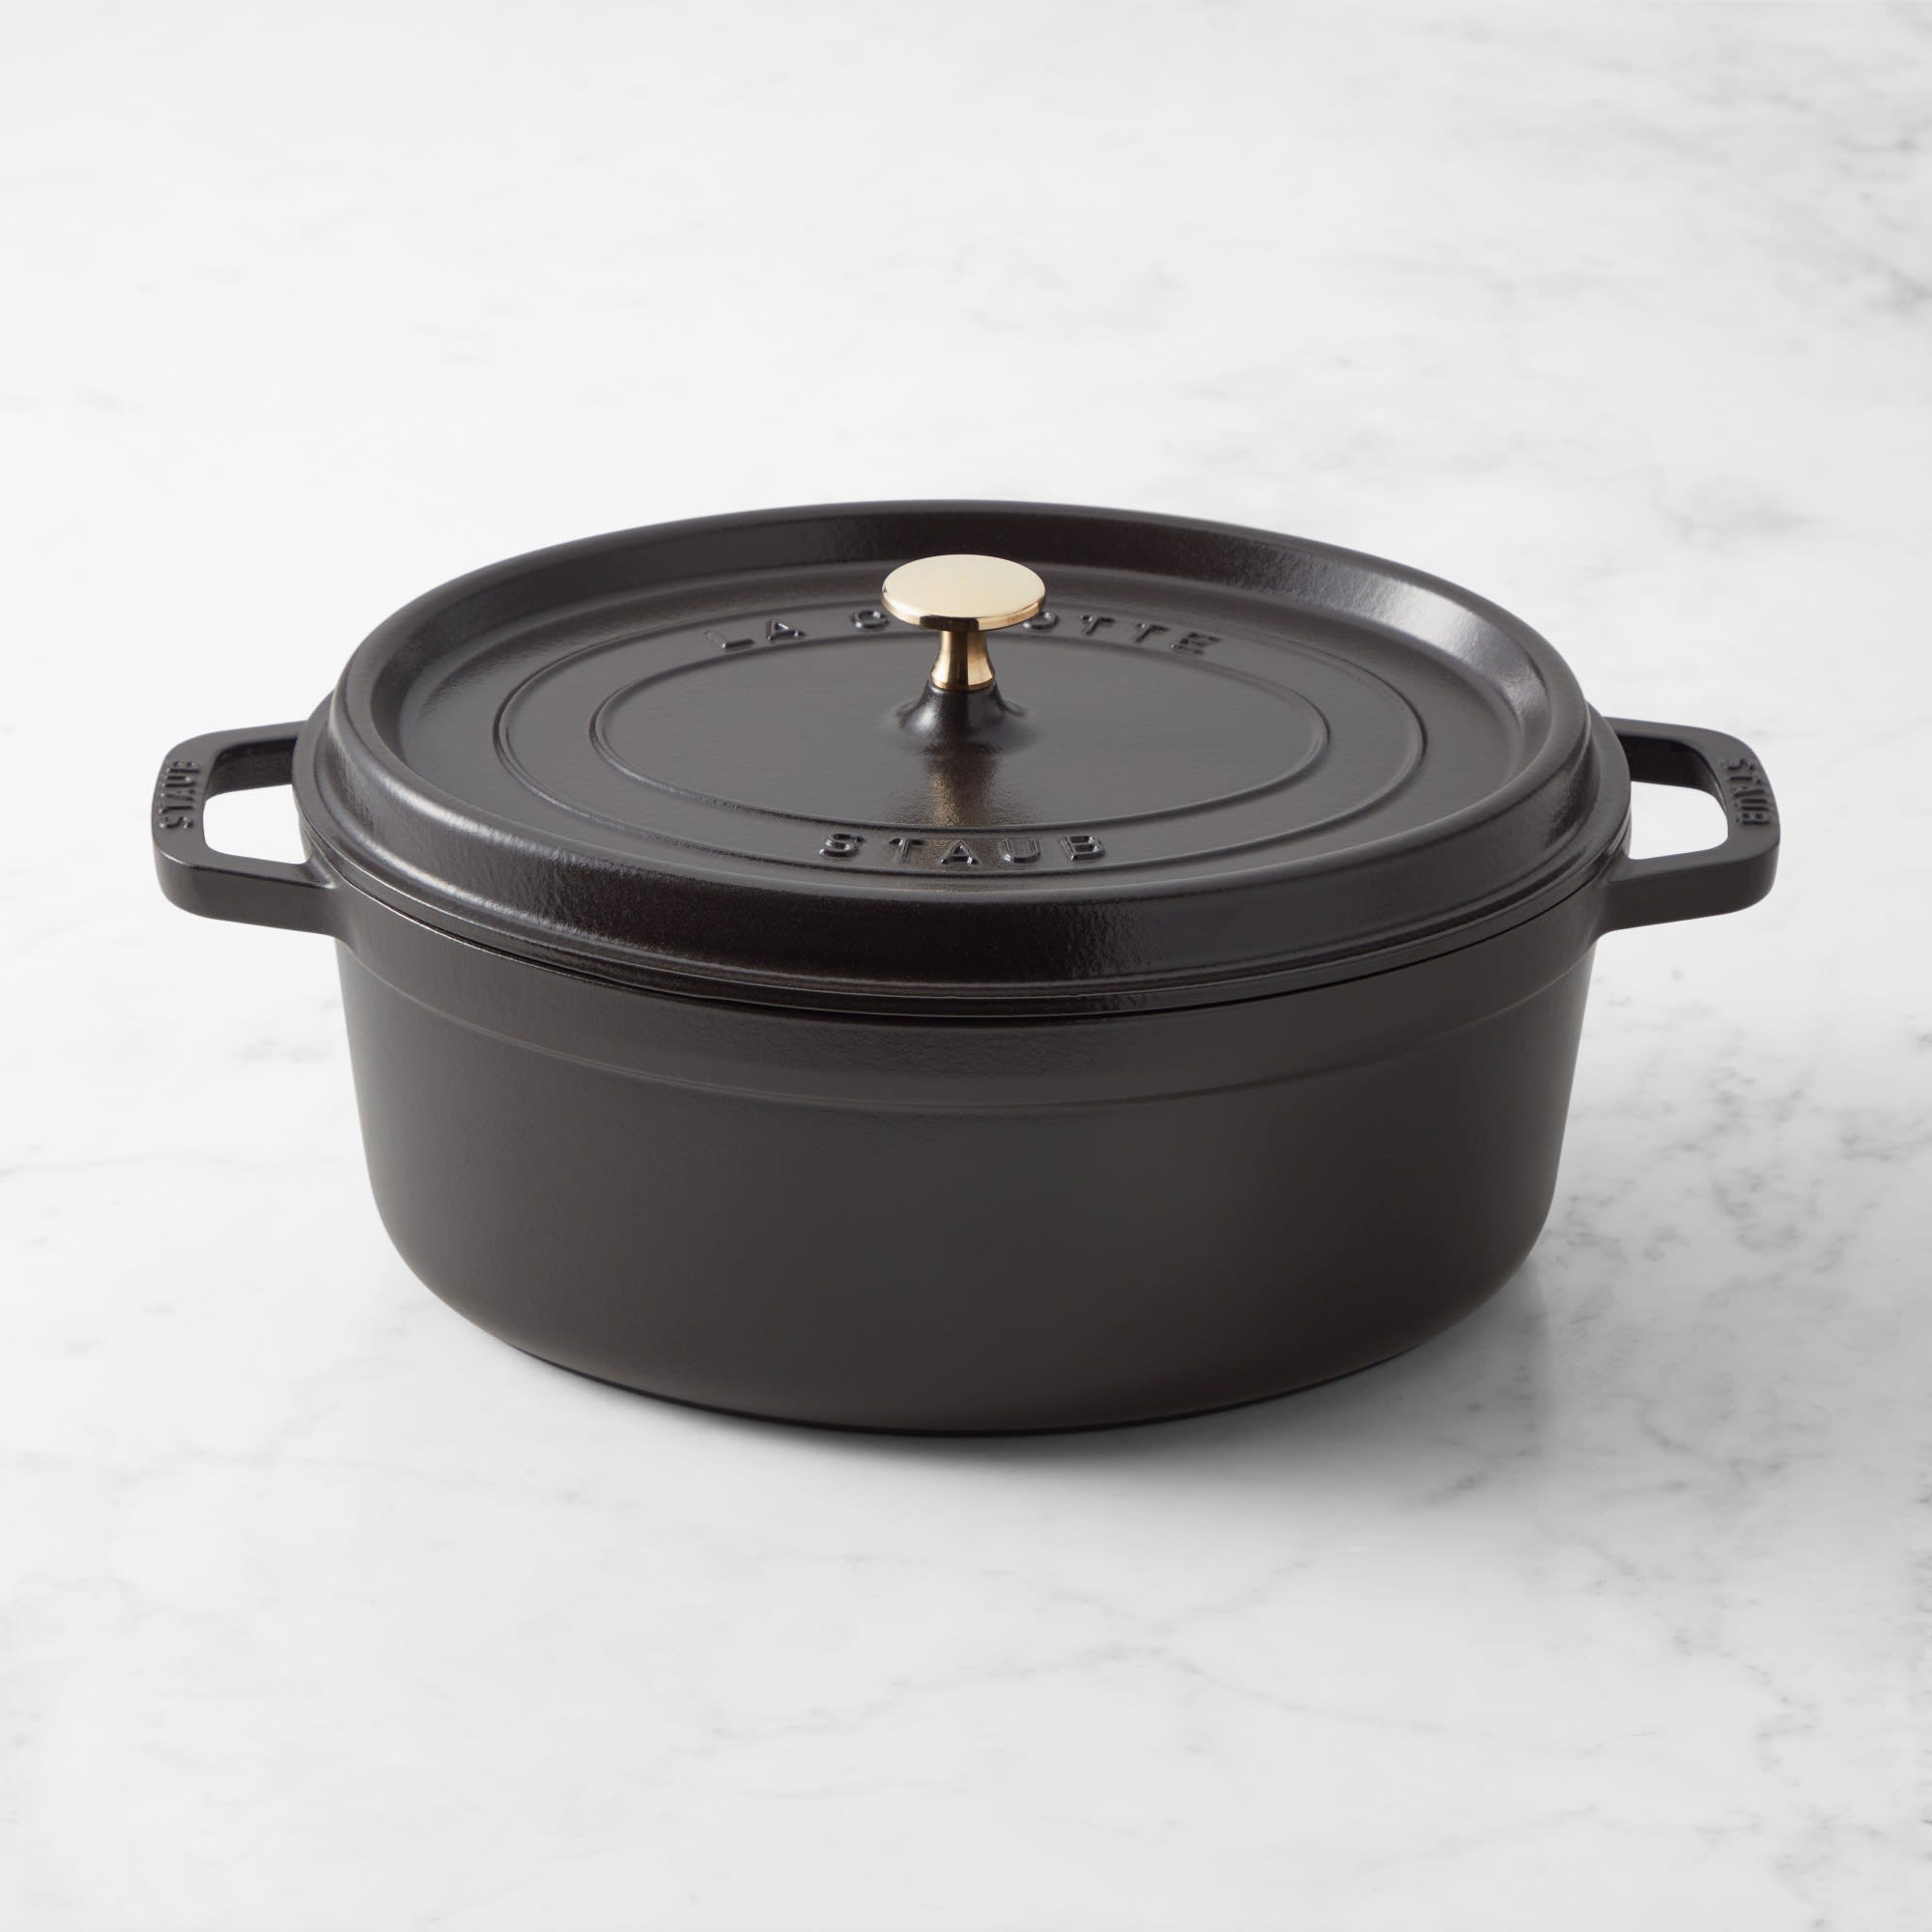 This Staub Dutch Oven Is Still My Favorite Pot of All Time After 14+ Years